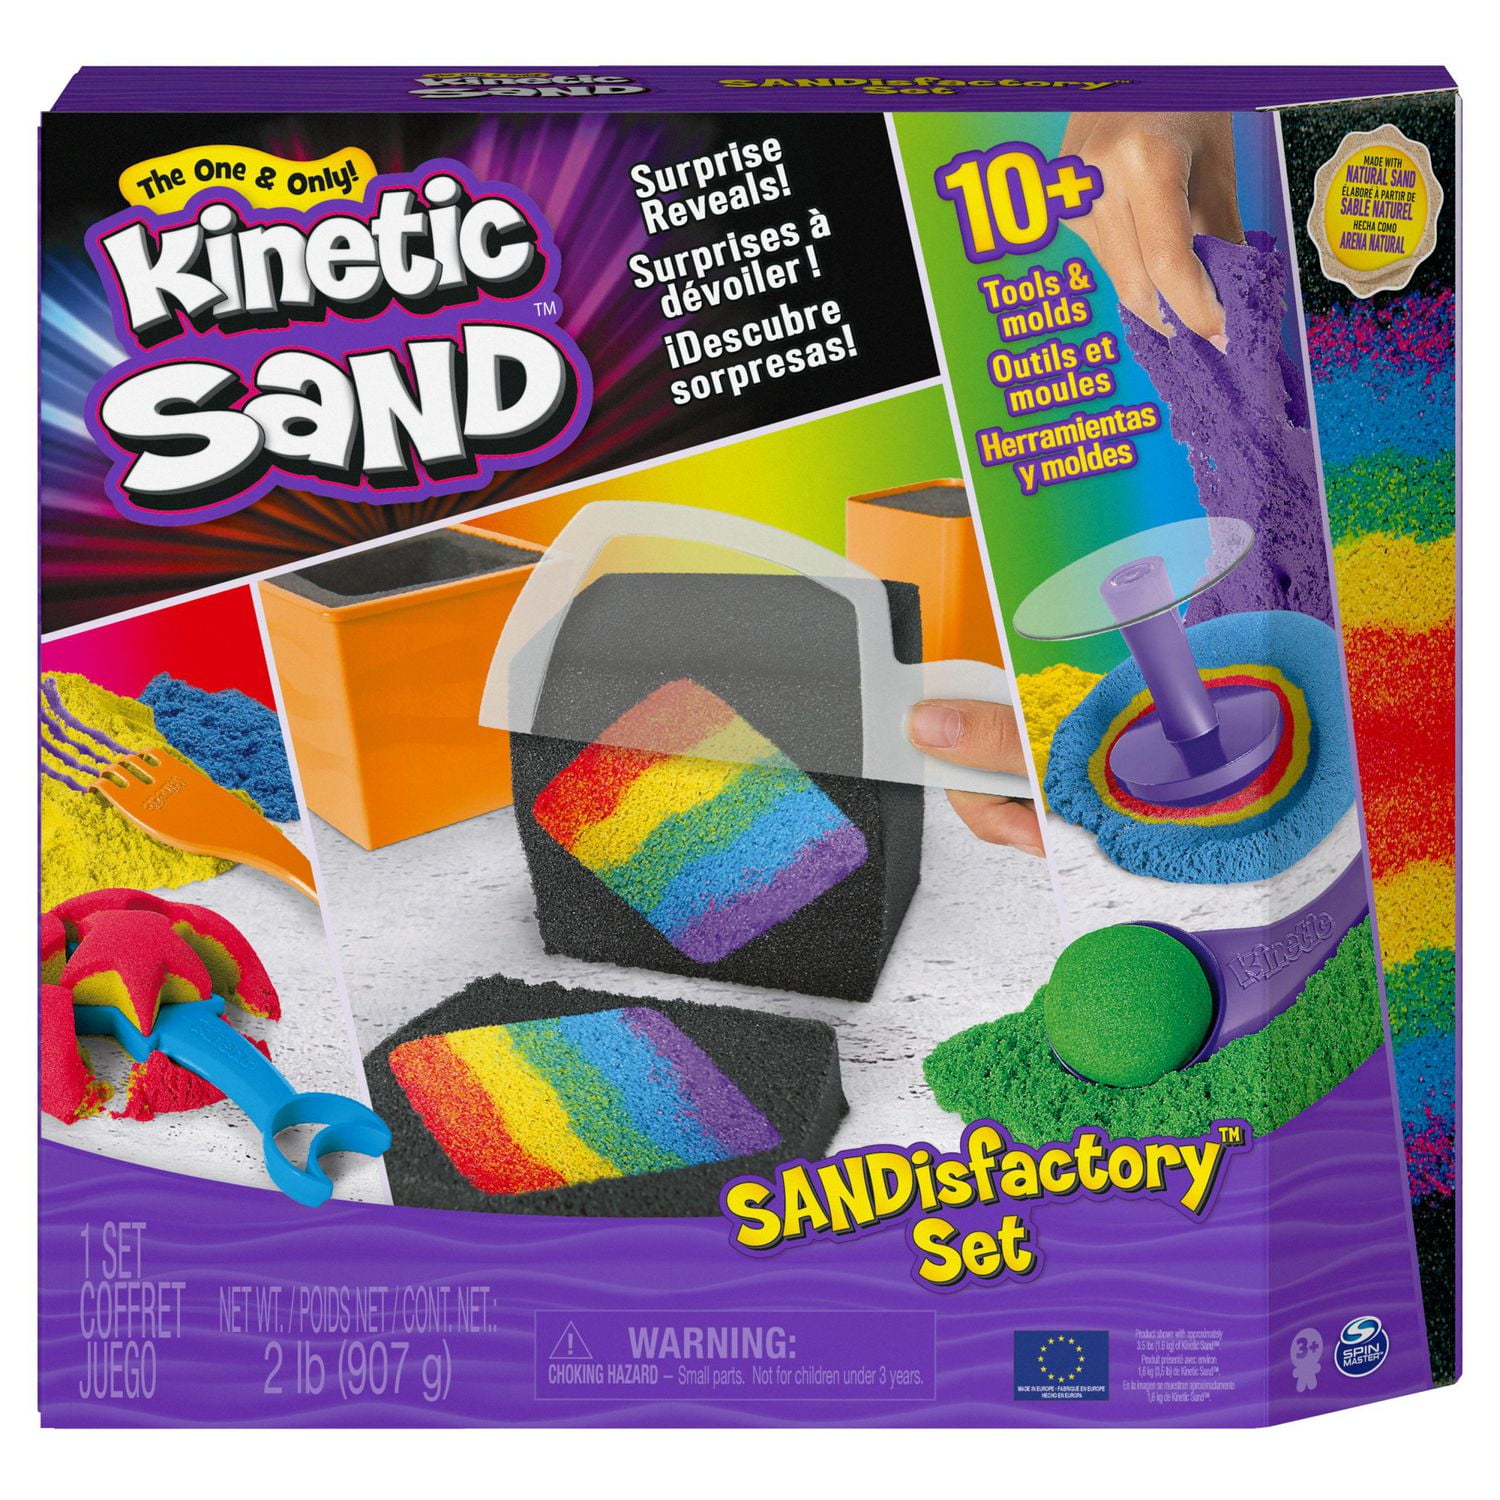 Kinetic Sand, Sandisfactory Set with 2lbs of Colored and Black Kinetic  Sand, Includes Over 10 Tools, Made with Natural Sand, Play Sand Sensory  Toys for Kids Aged 3 and Up 